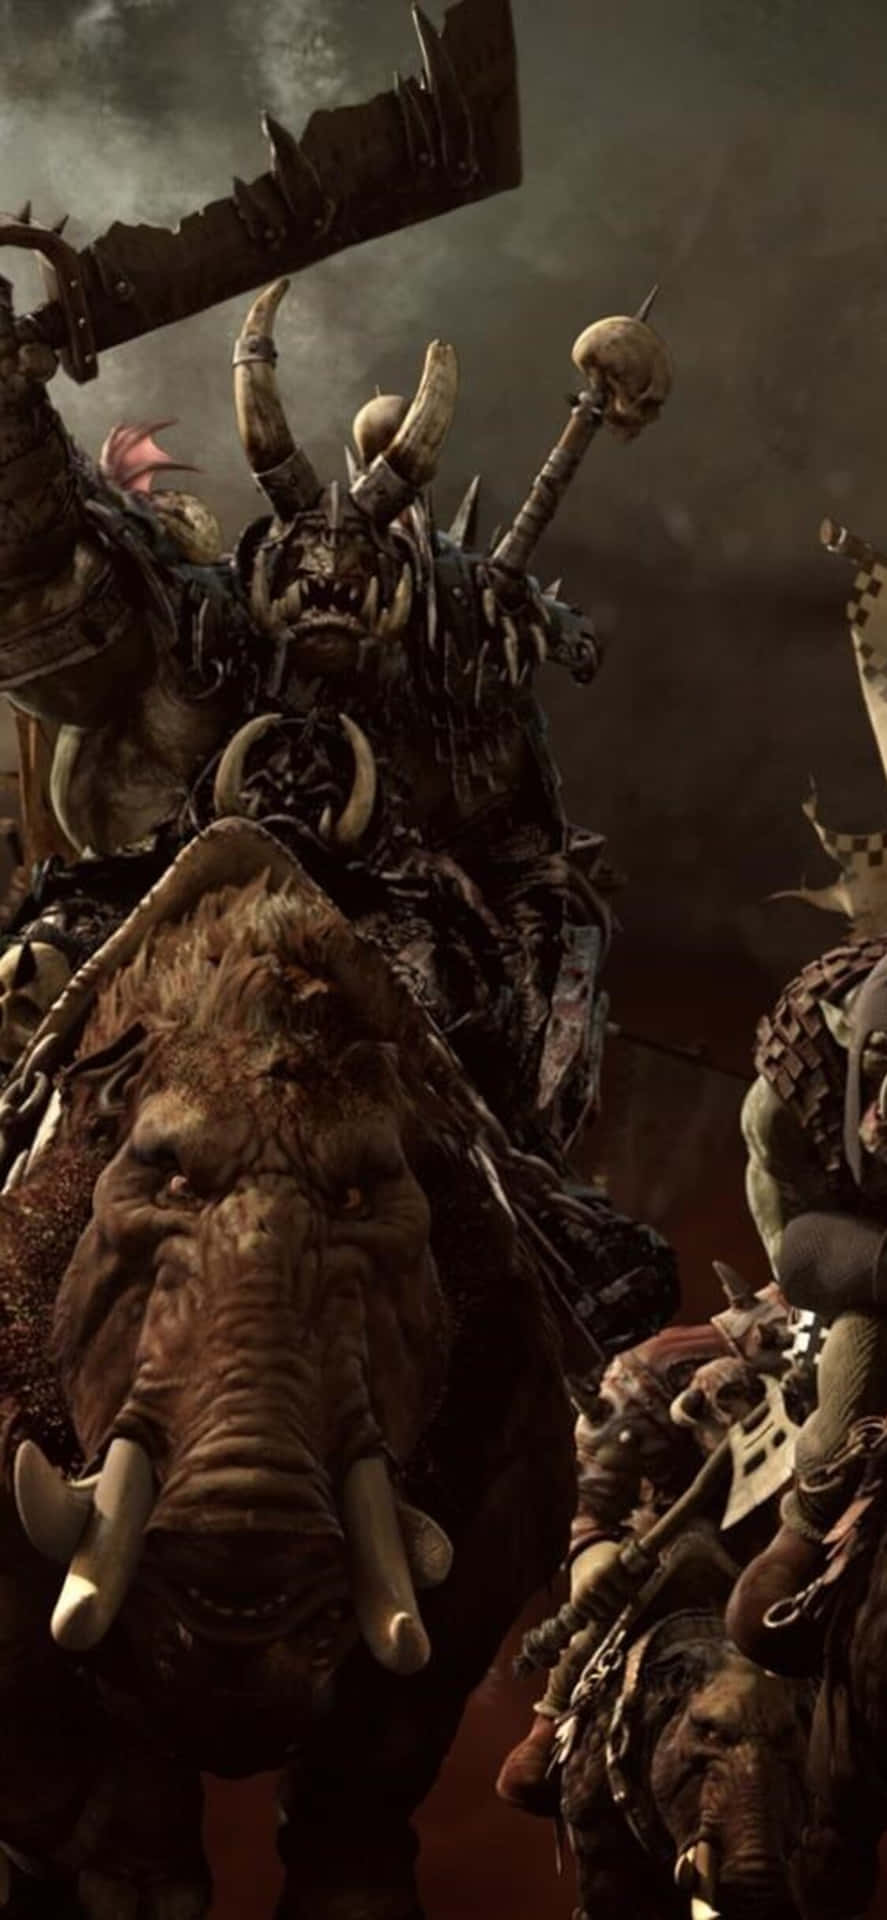 Join the Epic Battle in Total War: Warhammer for Iphone X